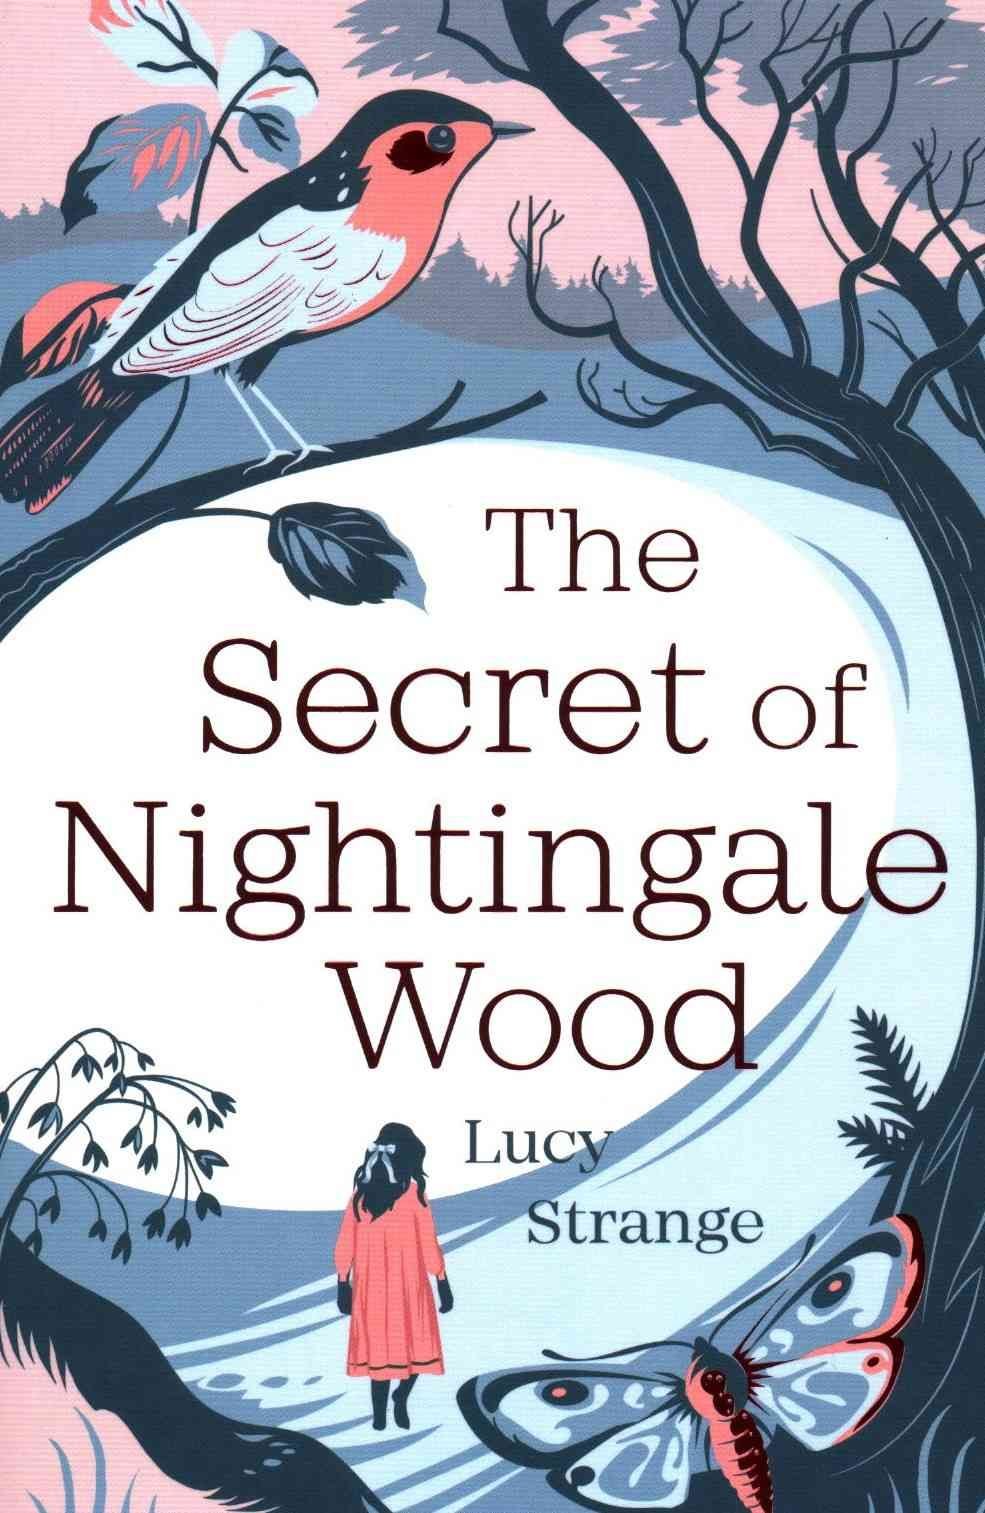 Nightingale　Free　Buy　With　Delivery　Secret　Lucy　by　of　Wood　Strange